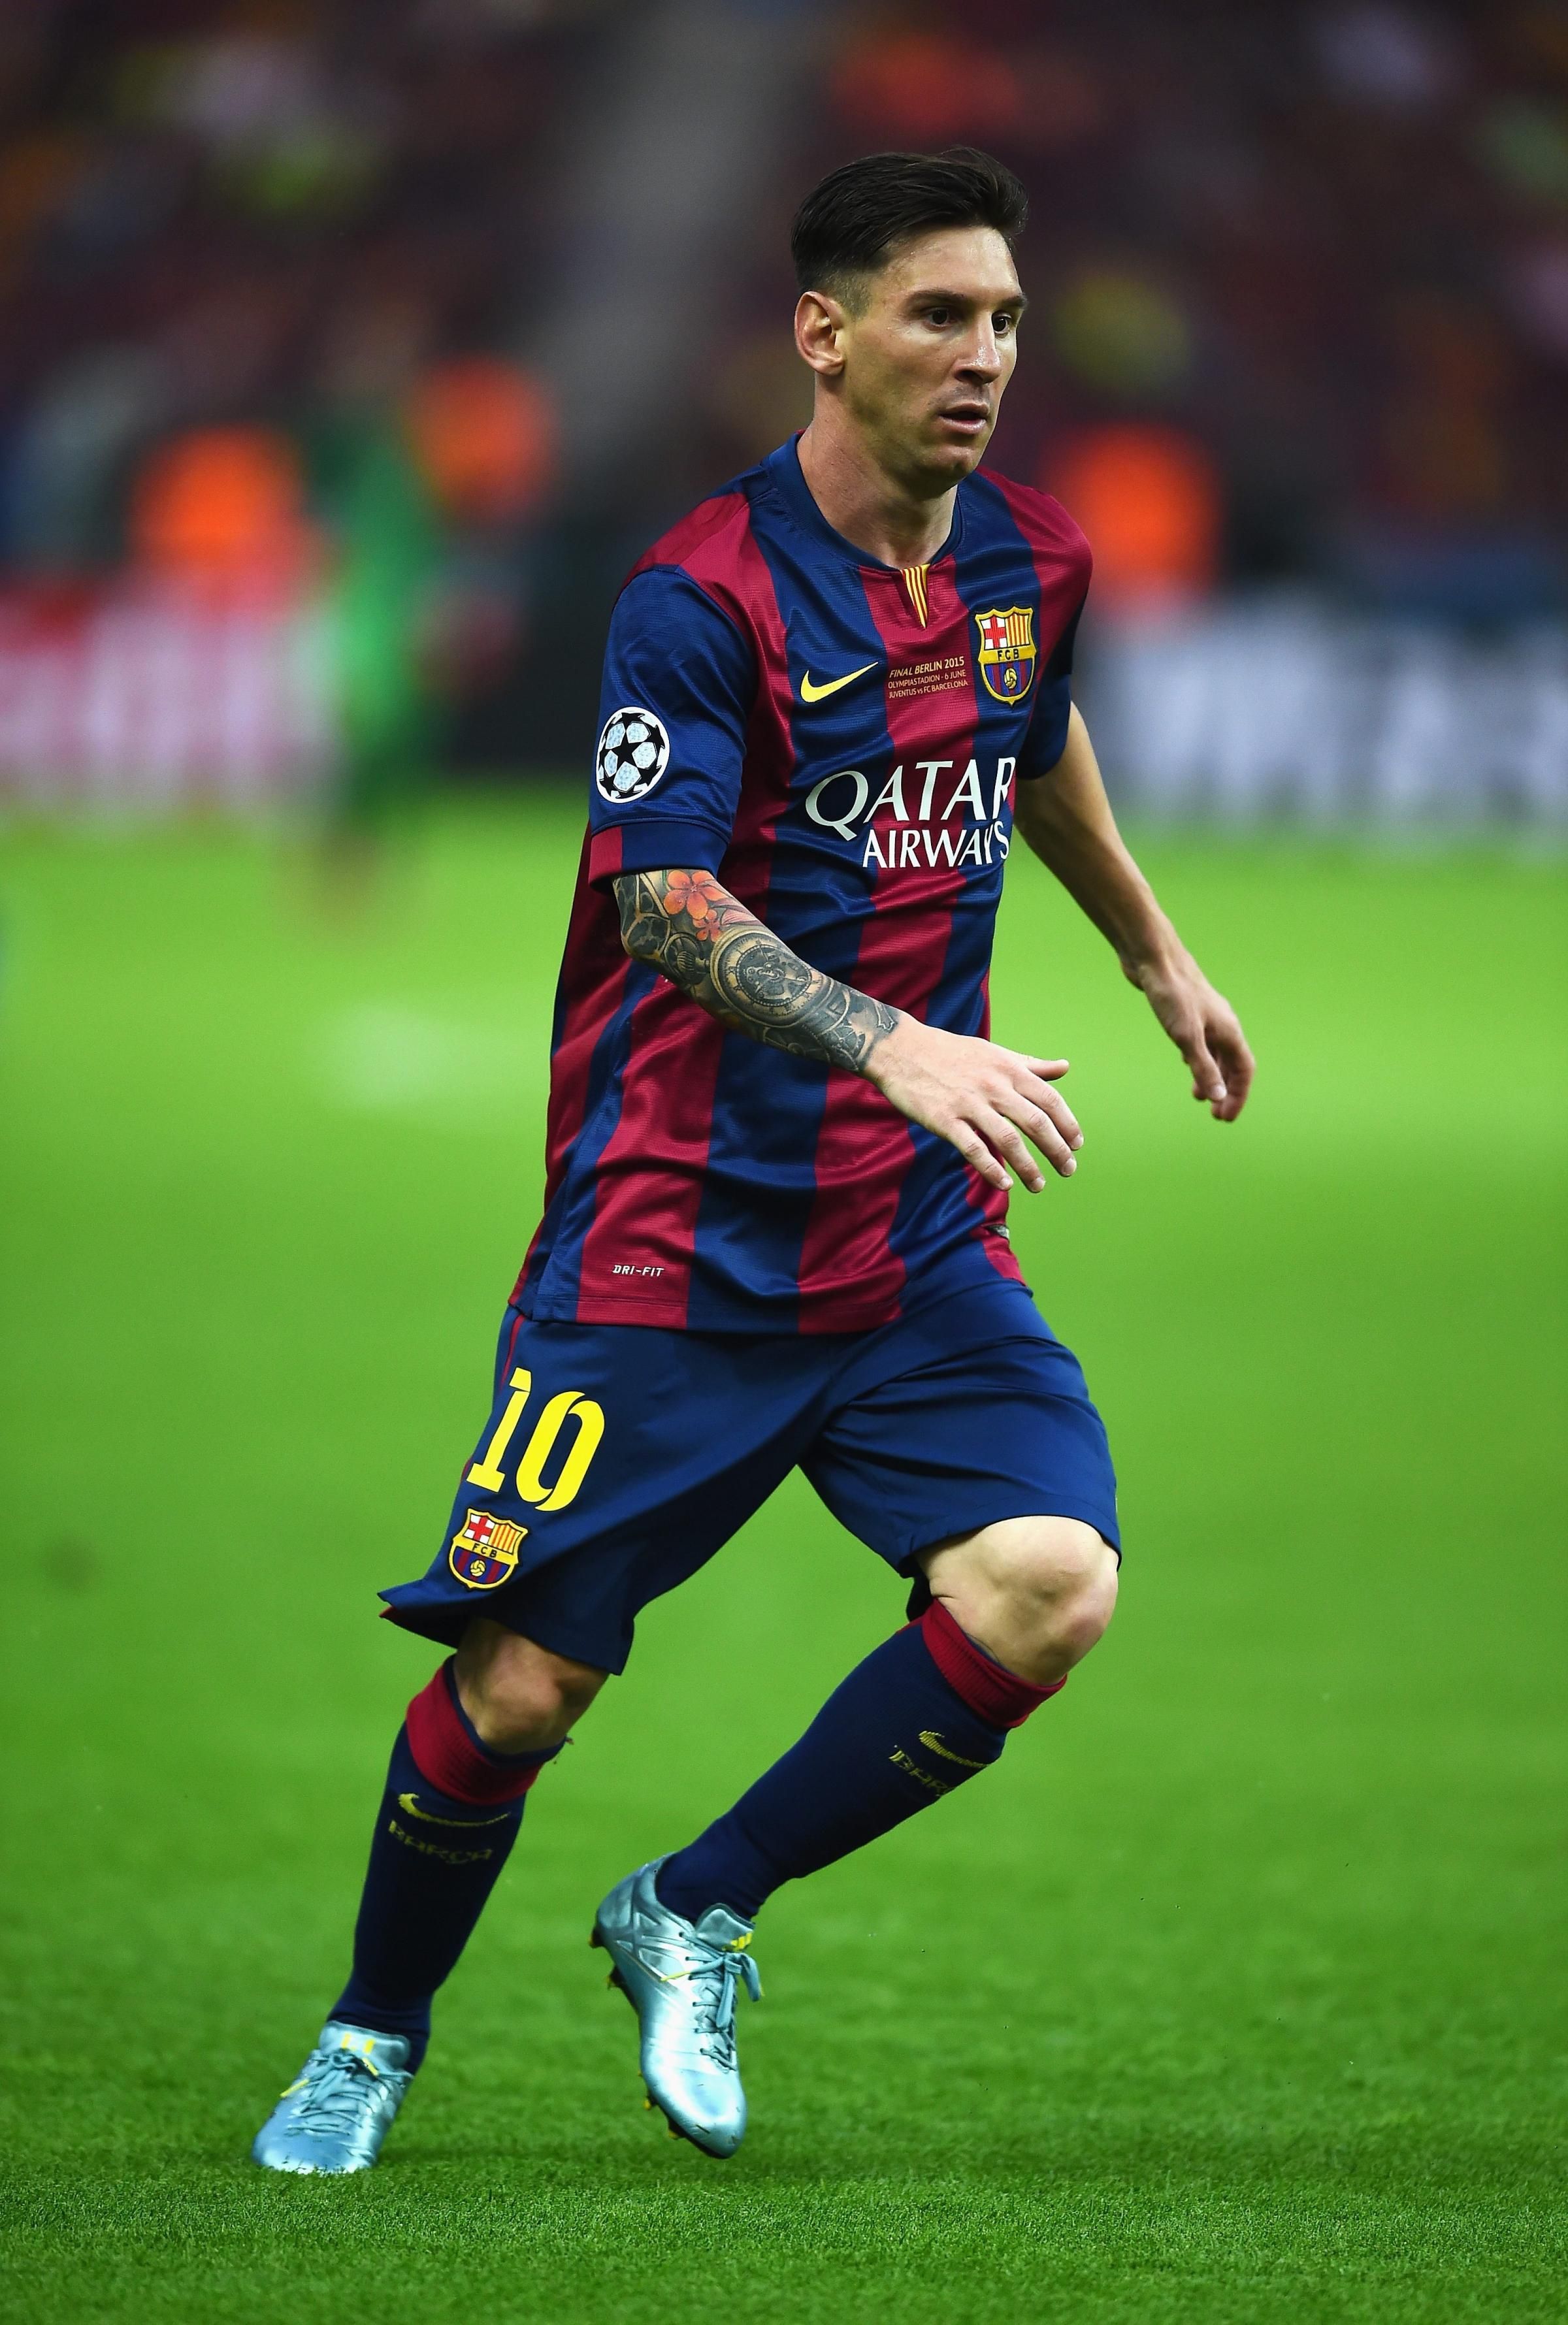 Background Messi Wallpaper Discover more Argentine Captain Football  Lionel Andrés Messi Messi wallpaper httpswww  Lionel messi Messi  Lionel andrés messi